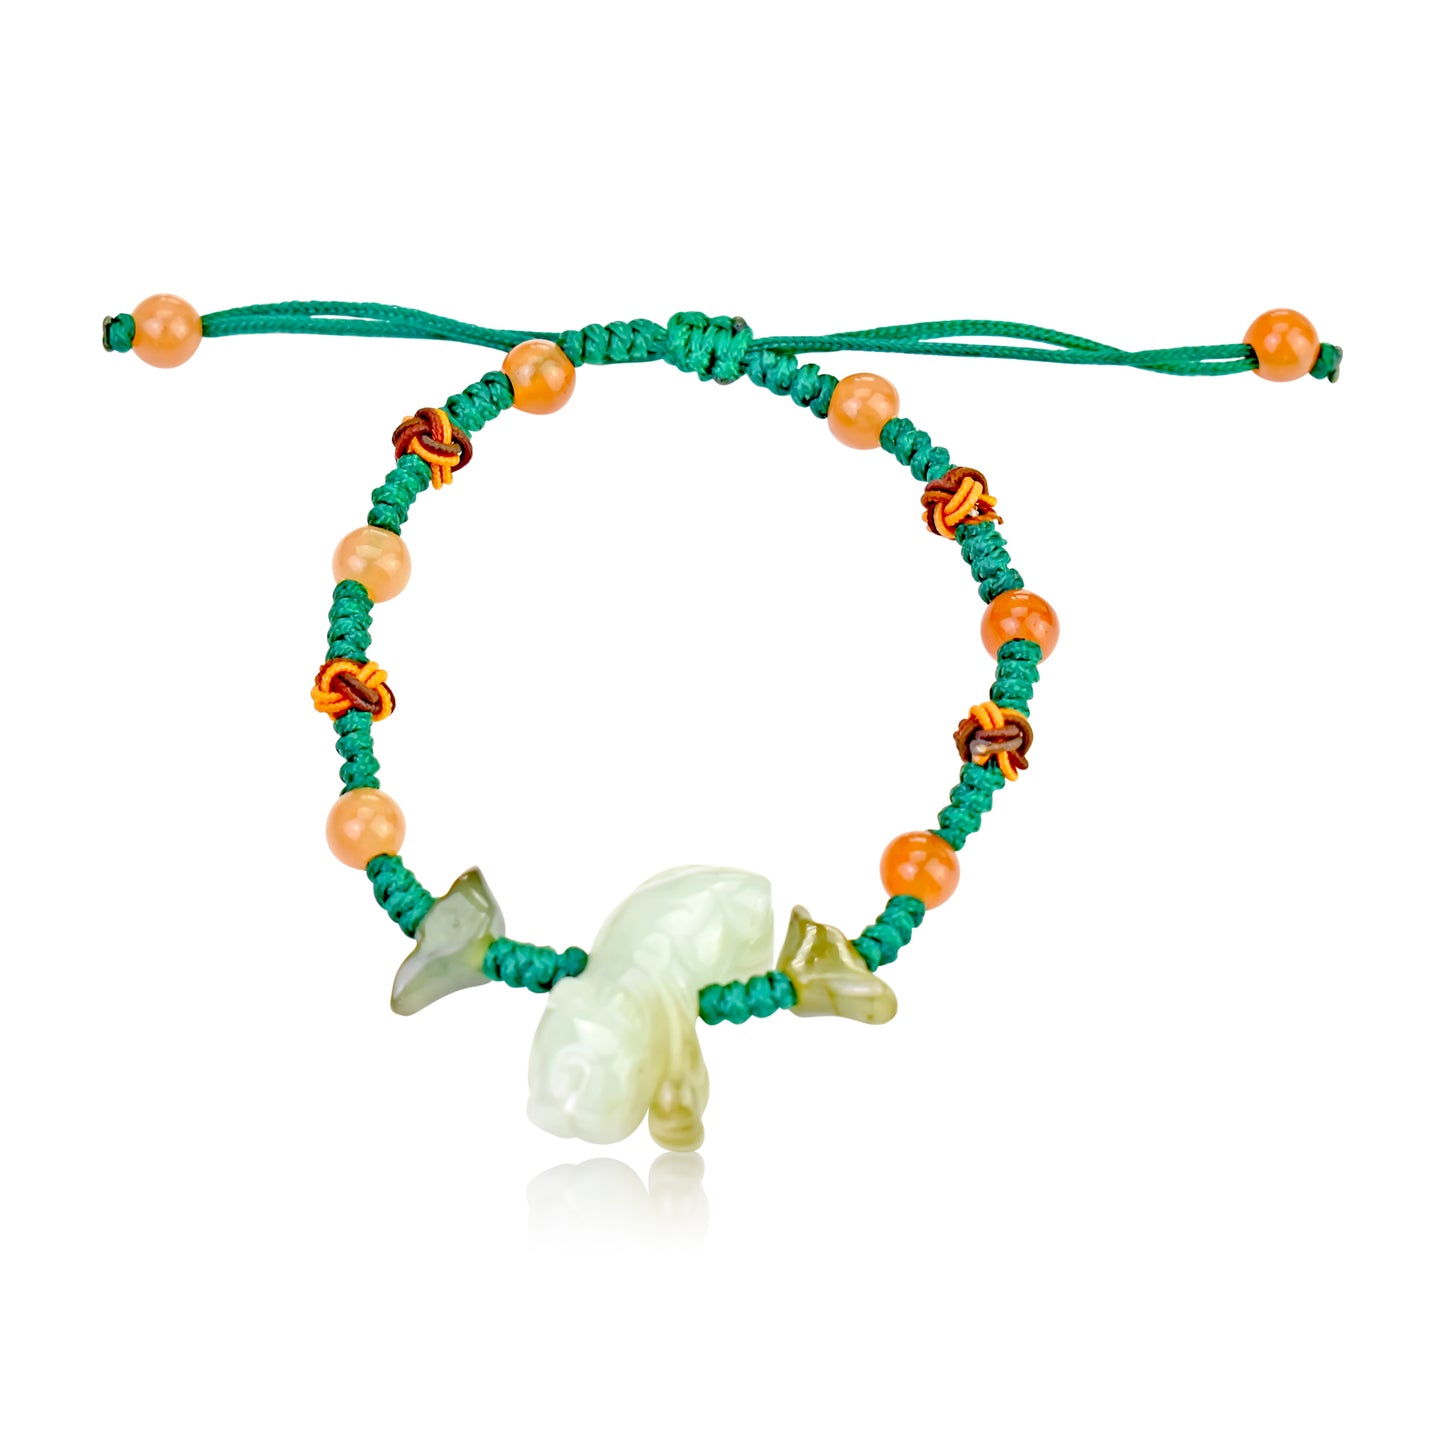 Step Into Your Inner Power with a Tiger Beaded Jade Bracelet made with Green Cord